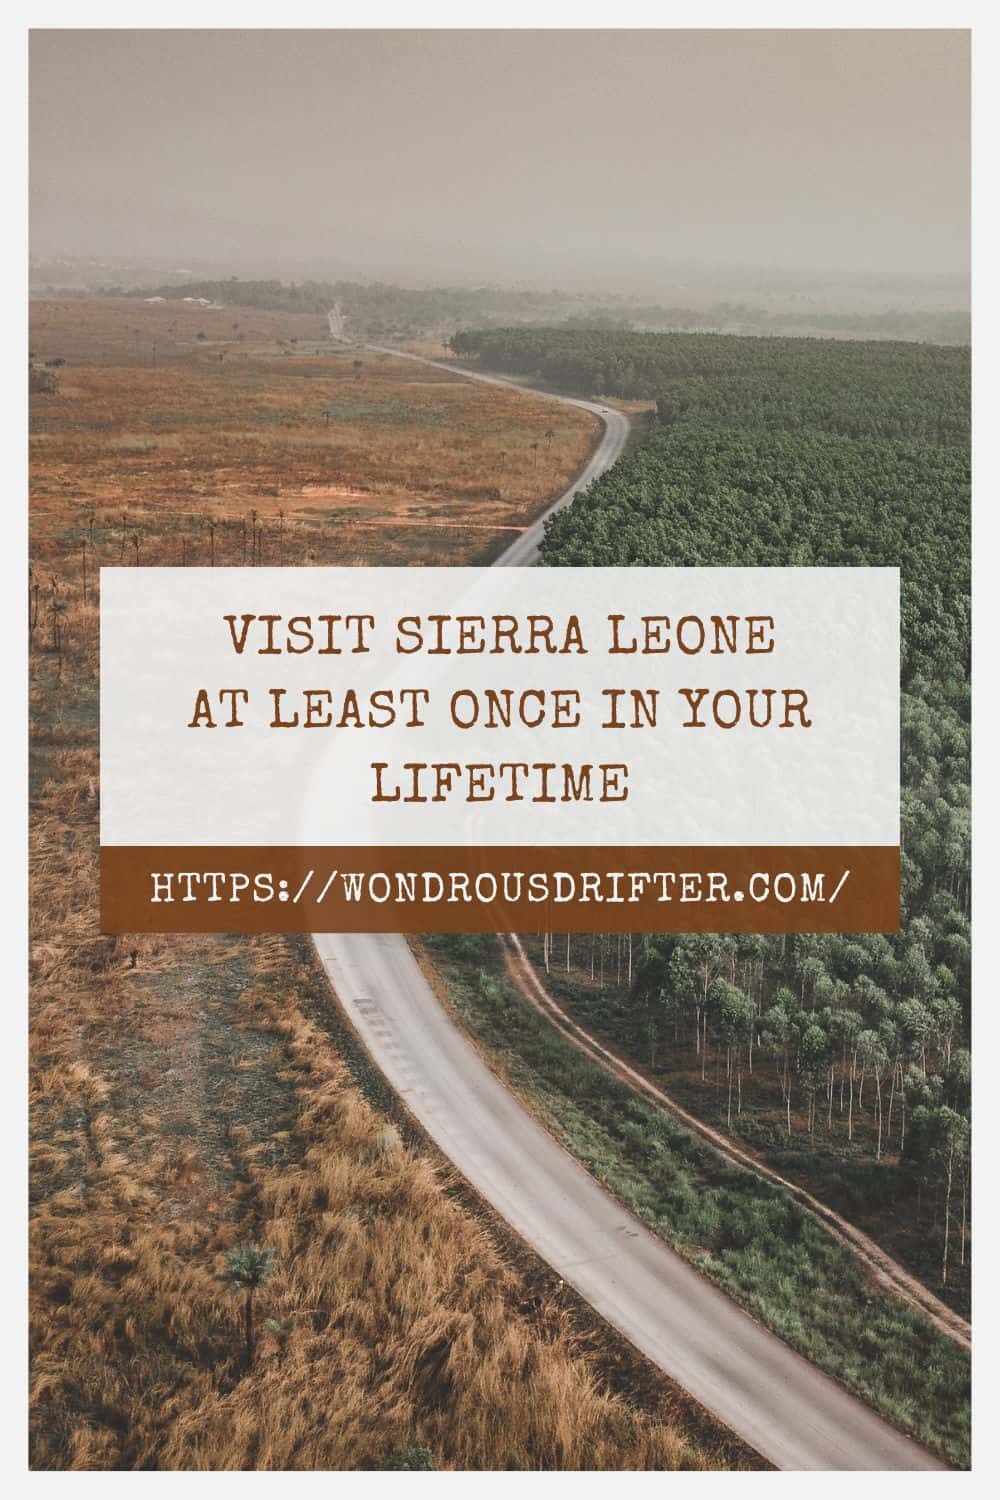 Visit Sierra Leone at least once in your lifetime